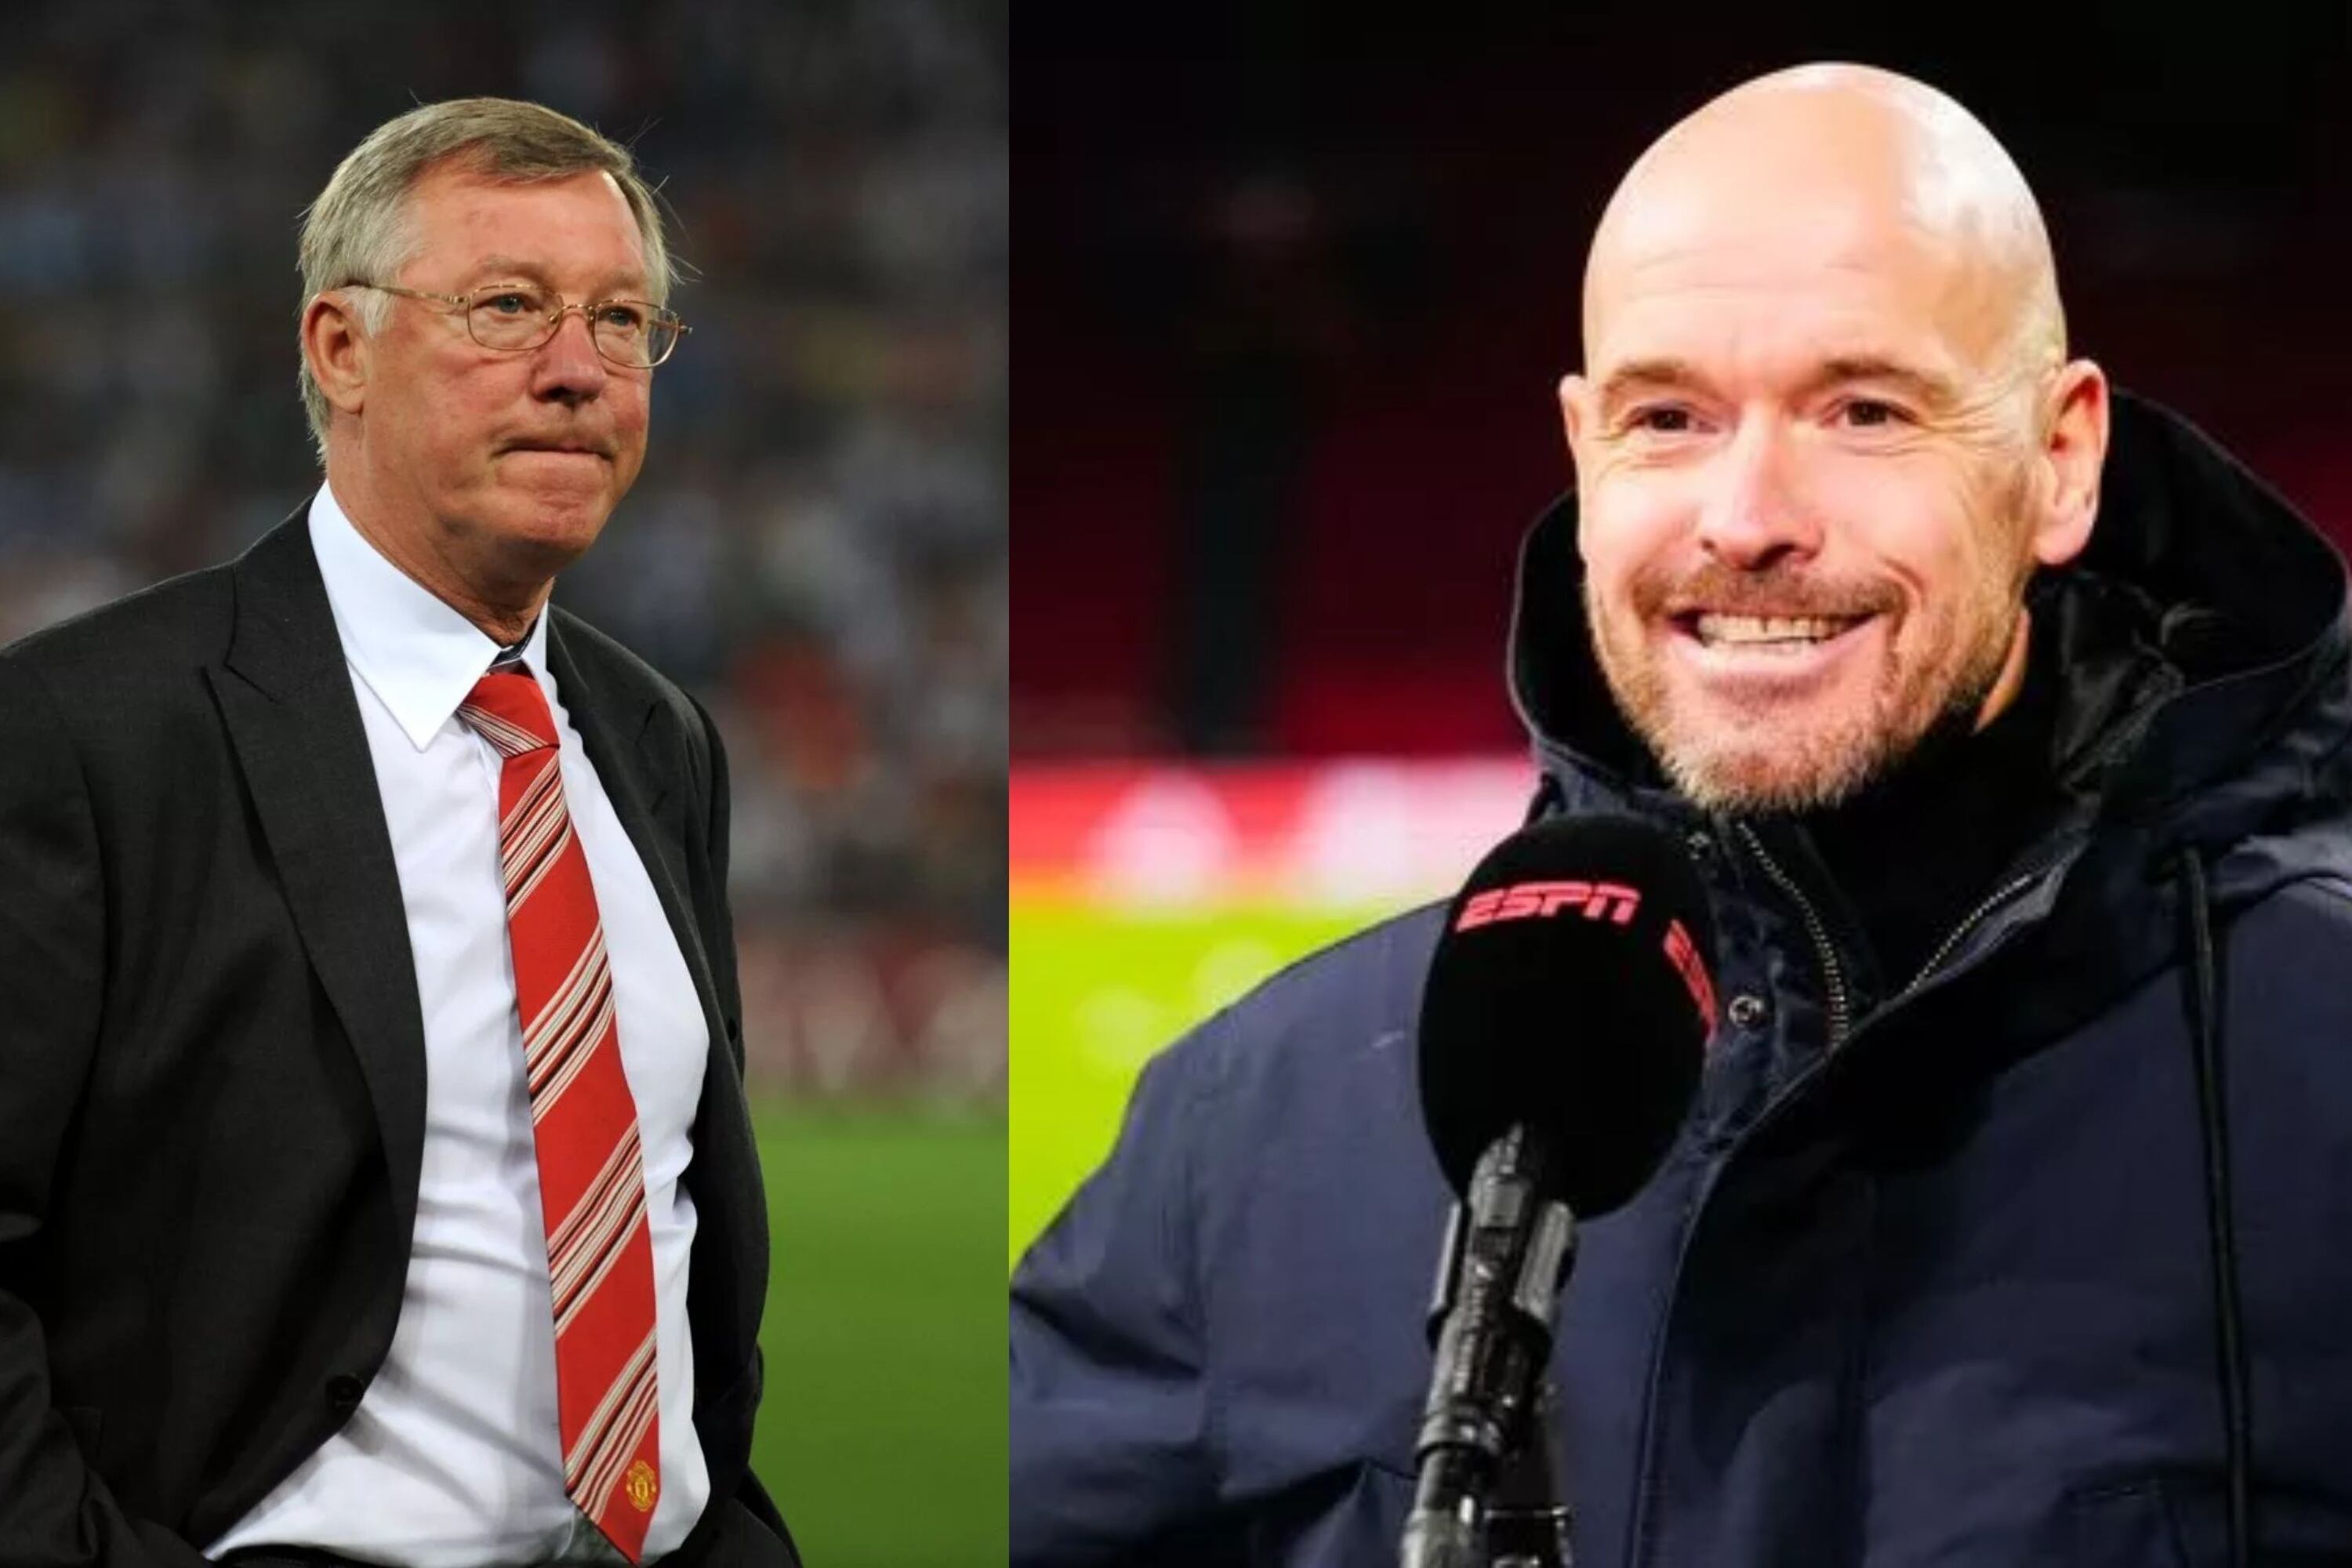 He was Ferguson's favorite, now Ten Hag pulls him out of Manchester United